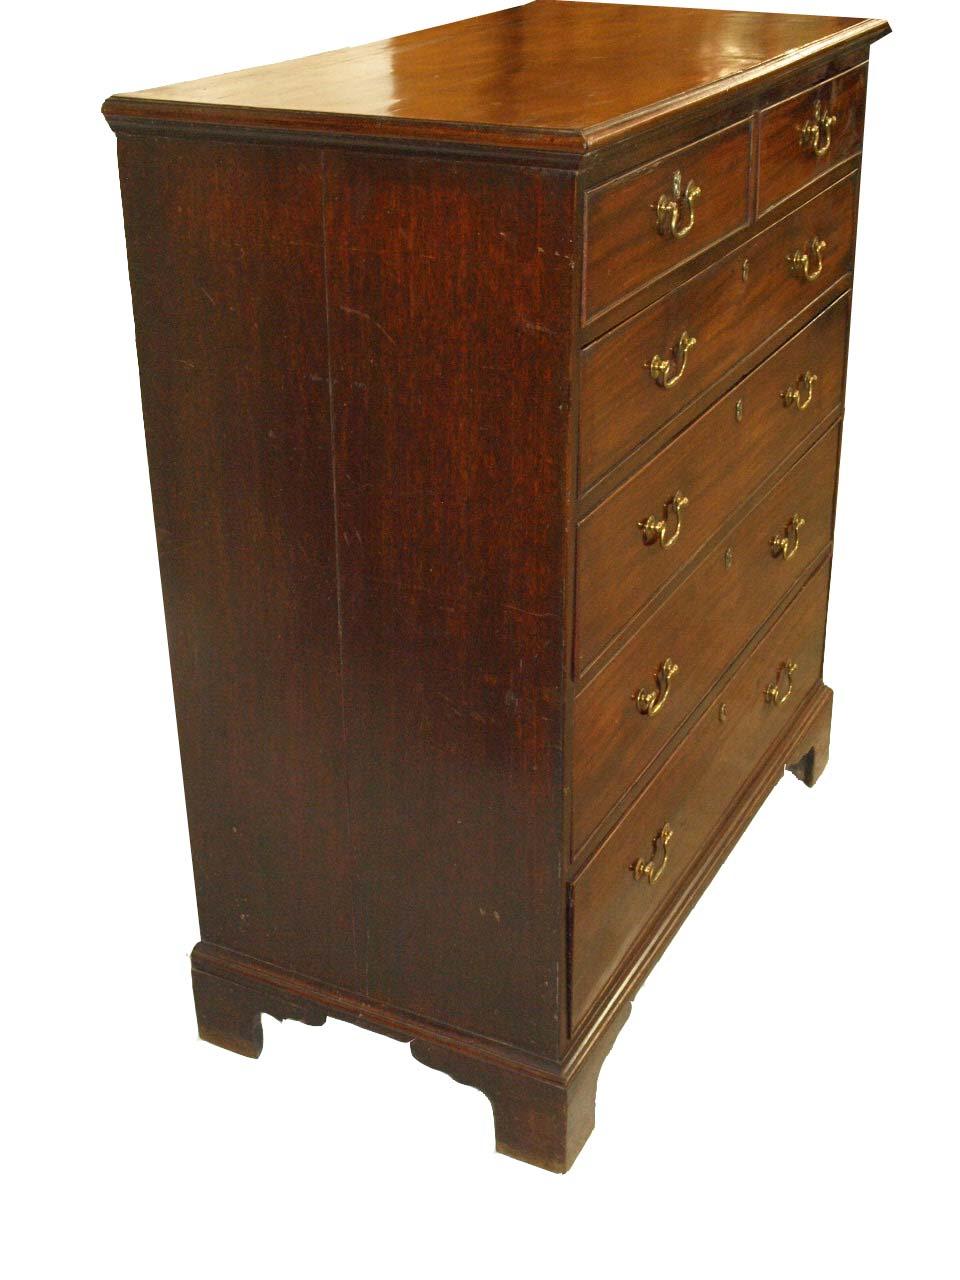 This 18th century English tall chest has a beautifully faded top of figured mahogany. There is a very small and minor split repair in the back right hand corner (see photo) . The two over four drawers retain their original swan neck brass pulls, the